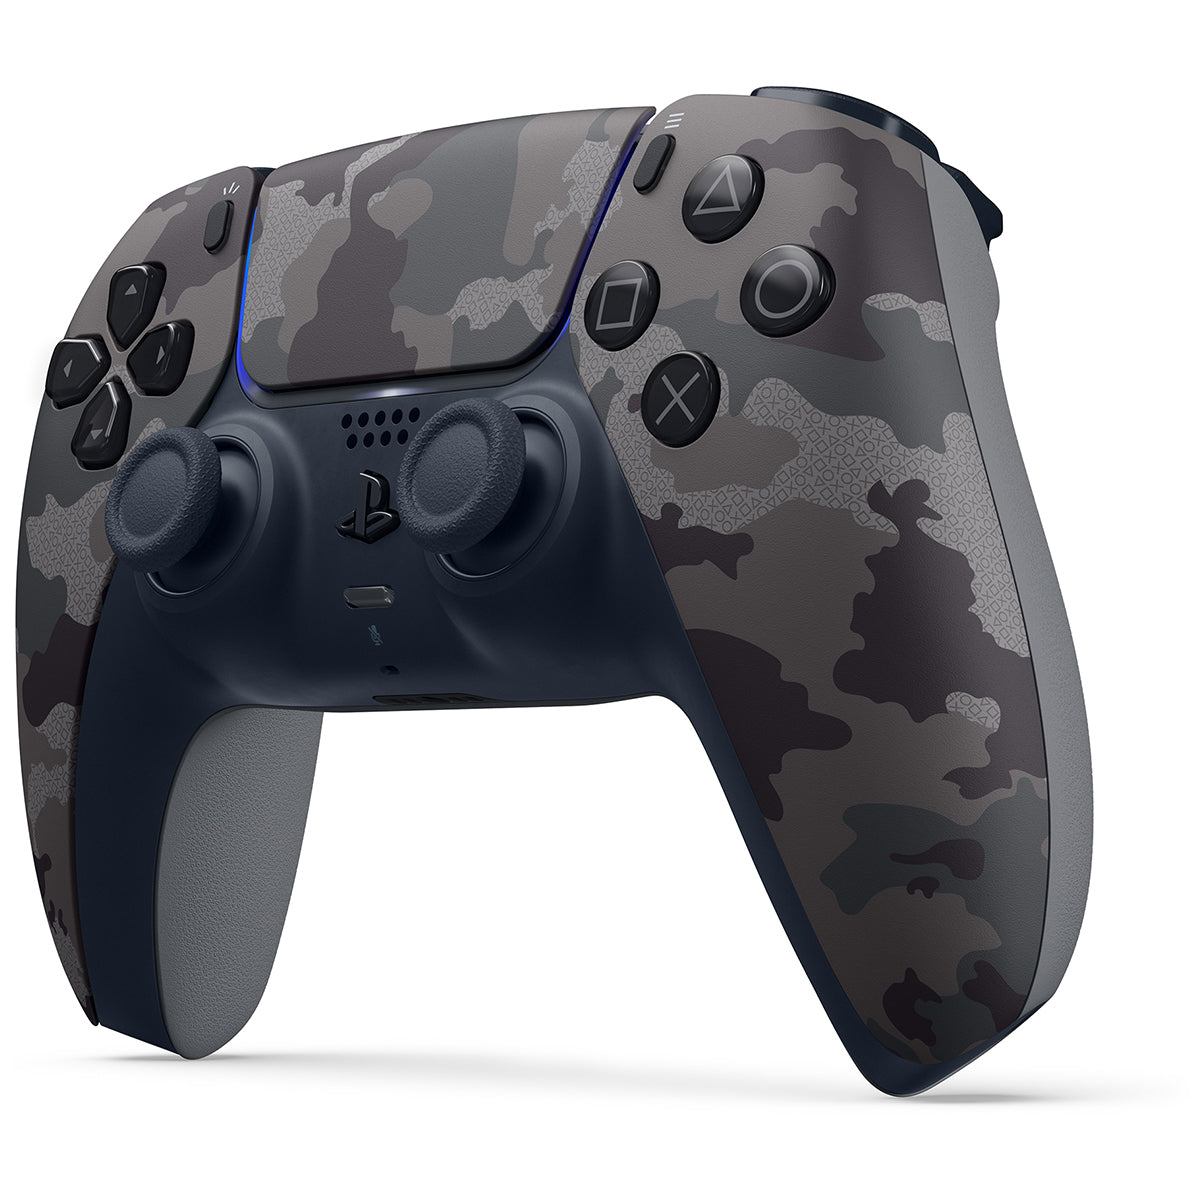 Sony Playstation 5 Disc Edition Bundle with Extra Gray Camo Controller, Black PULSE 3D Wireless Headset and Gamer Starter Pack - Pro-Distributing